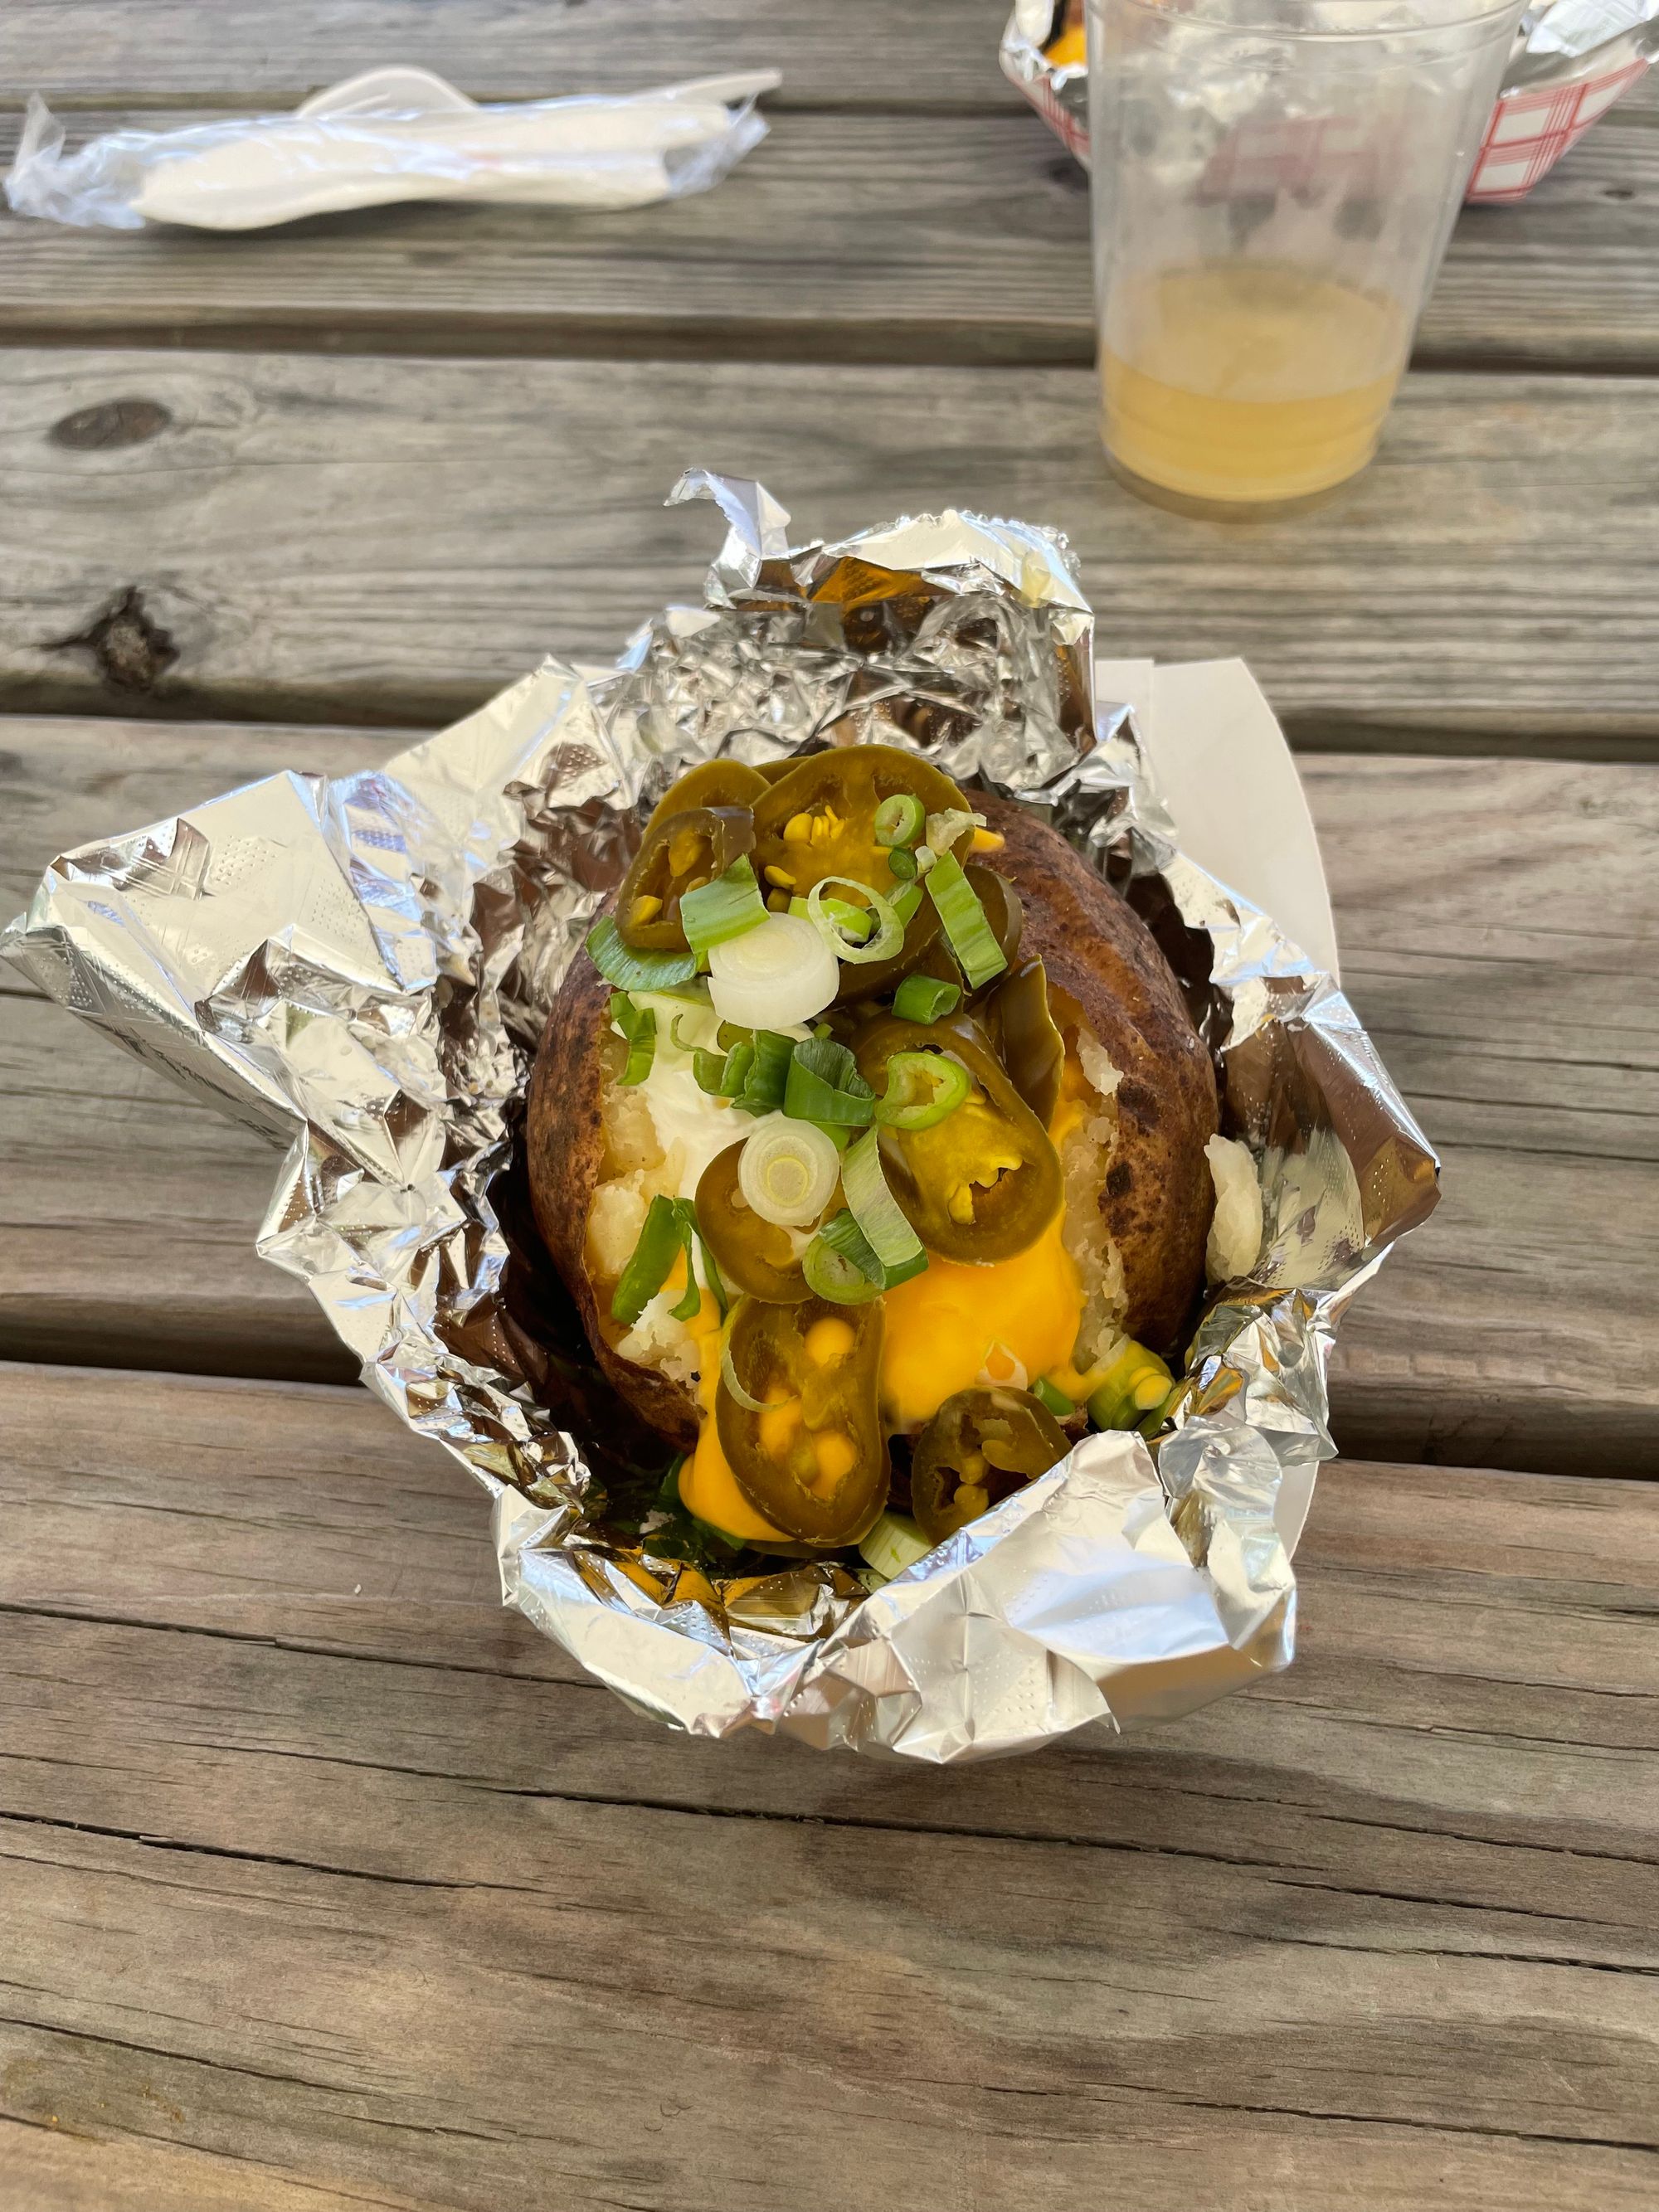 A baked potato with liquid cheese, jalapeños, sour cream, and chives.